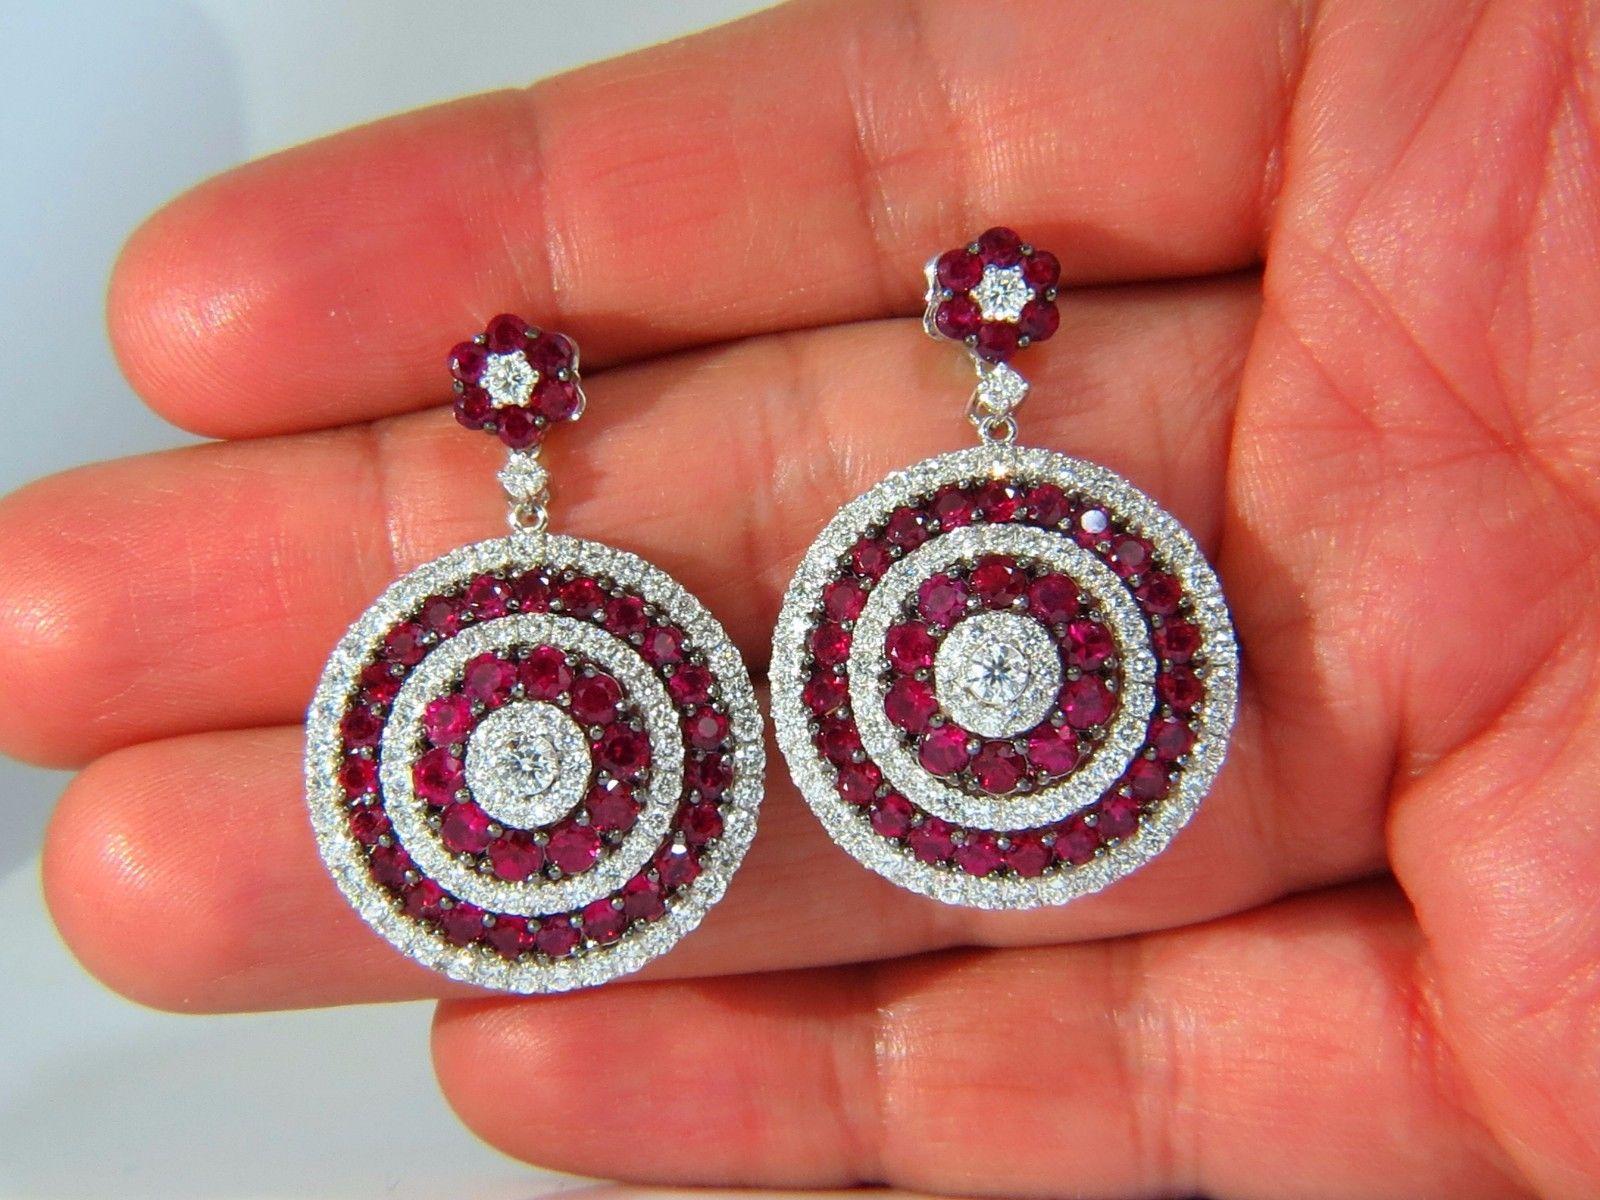 Bulls Eye / Roulette / Circular Raised Dome

Ruby Diamonds Dangling Earrings & Cluster top

7.50ct. Natural Red Rubies.

Rubies: Rounds, Full Cuts.

Transparent, clean clarity & even red tone.

2.24cts of round diamonds: 

G-color, Vs-2